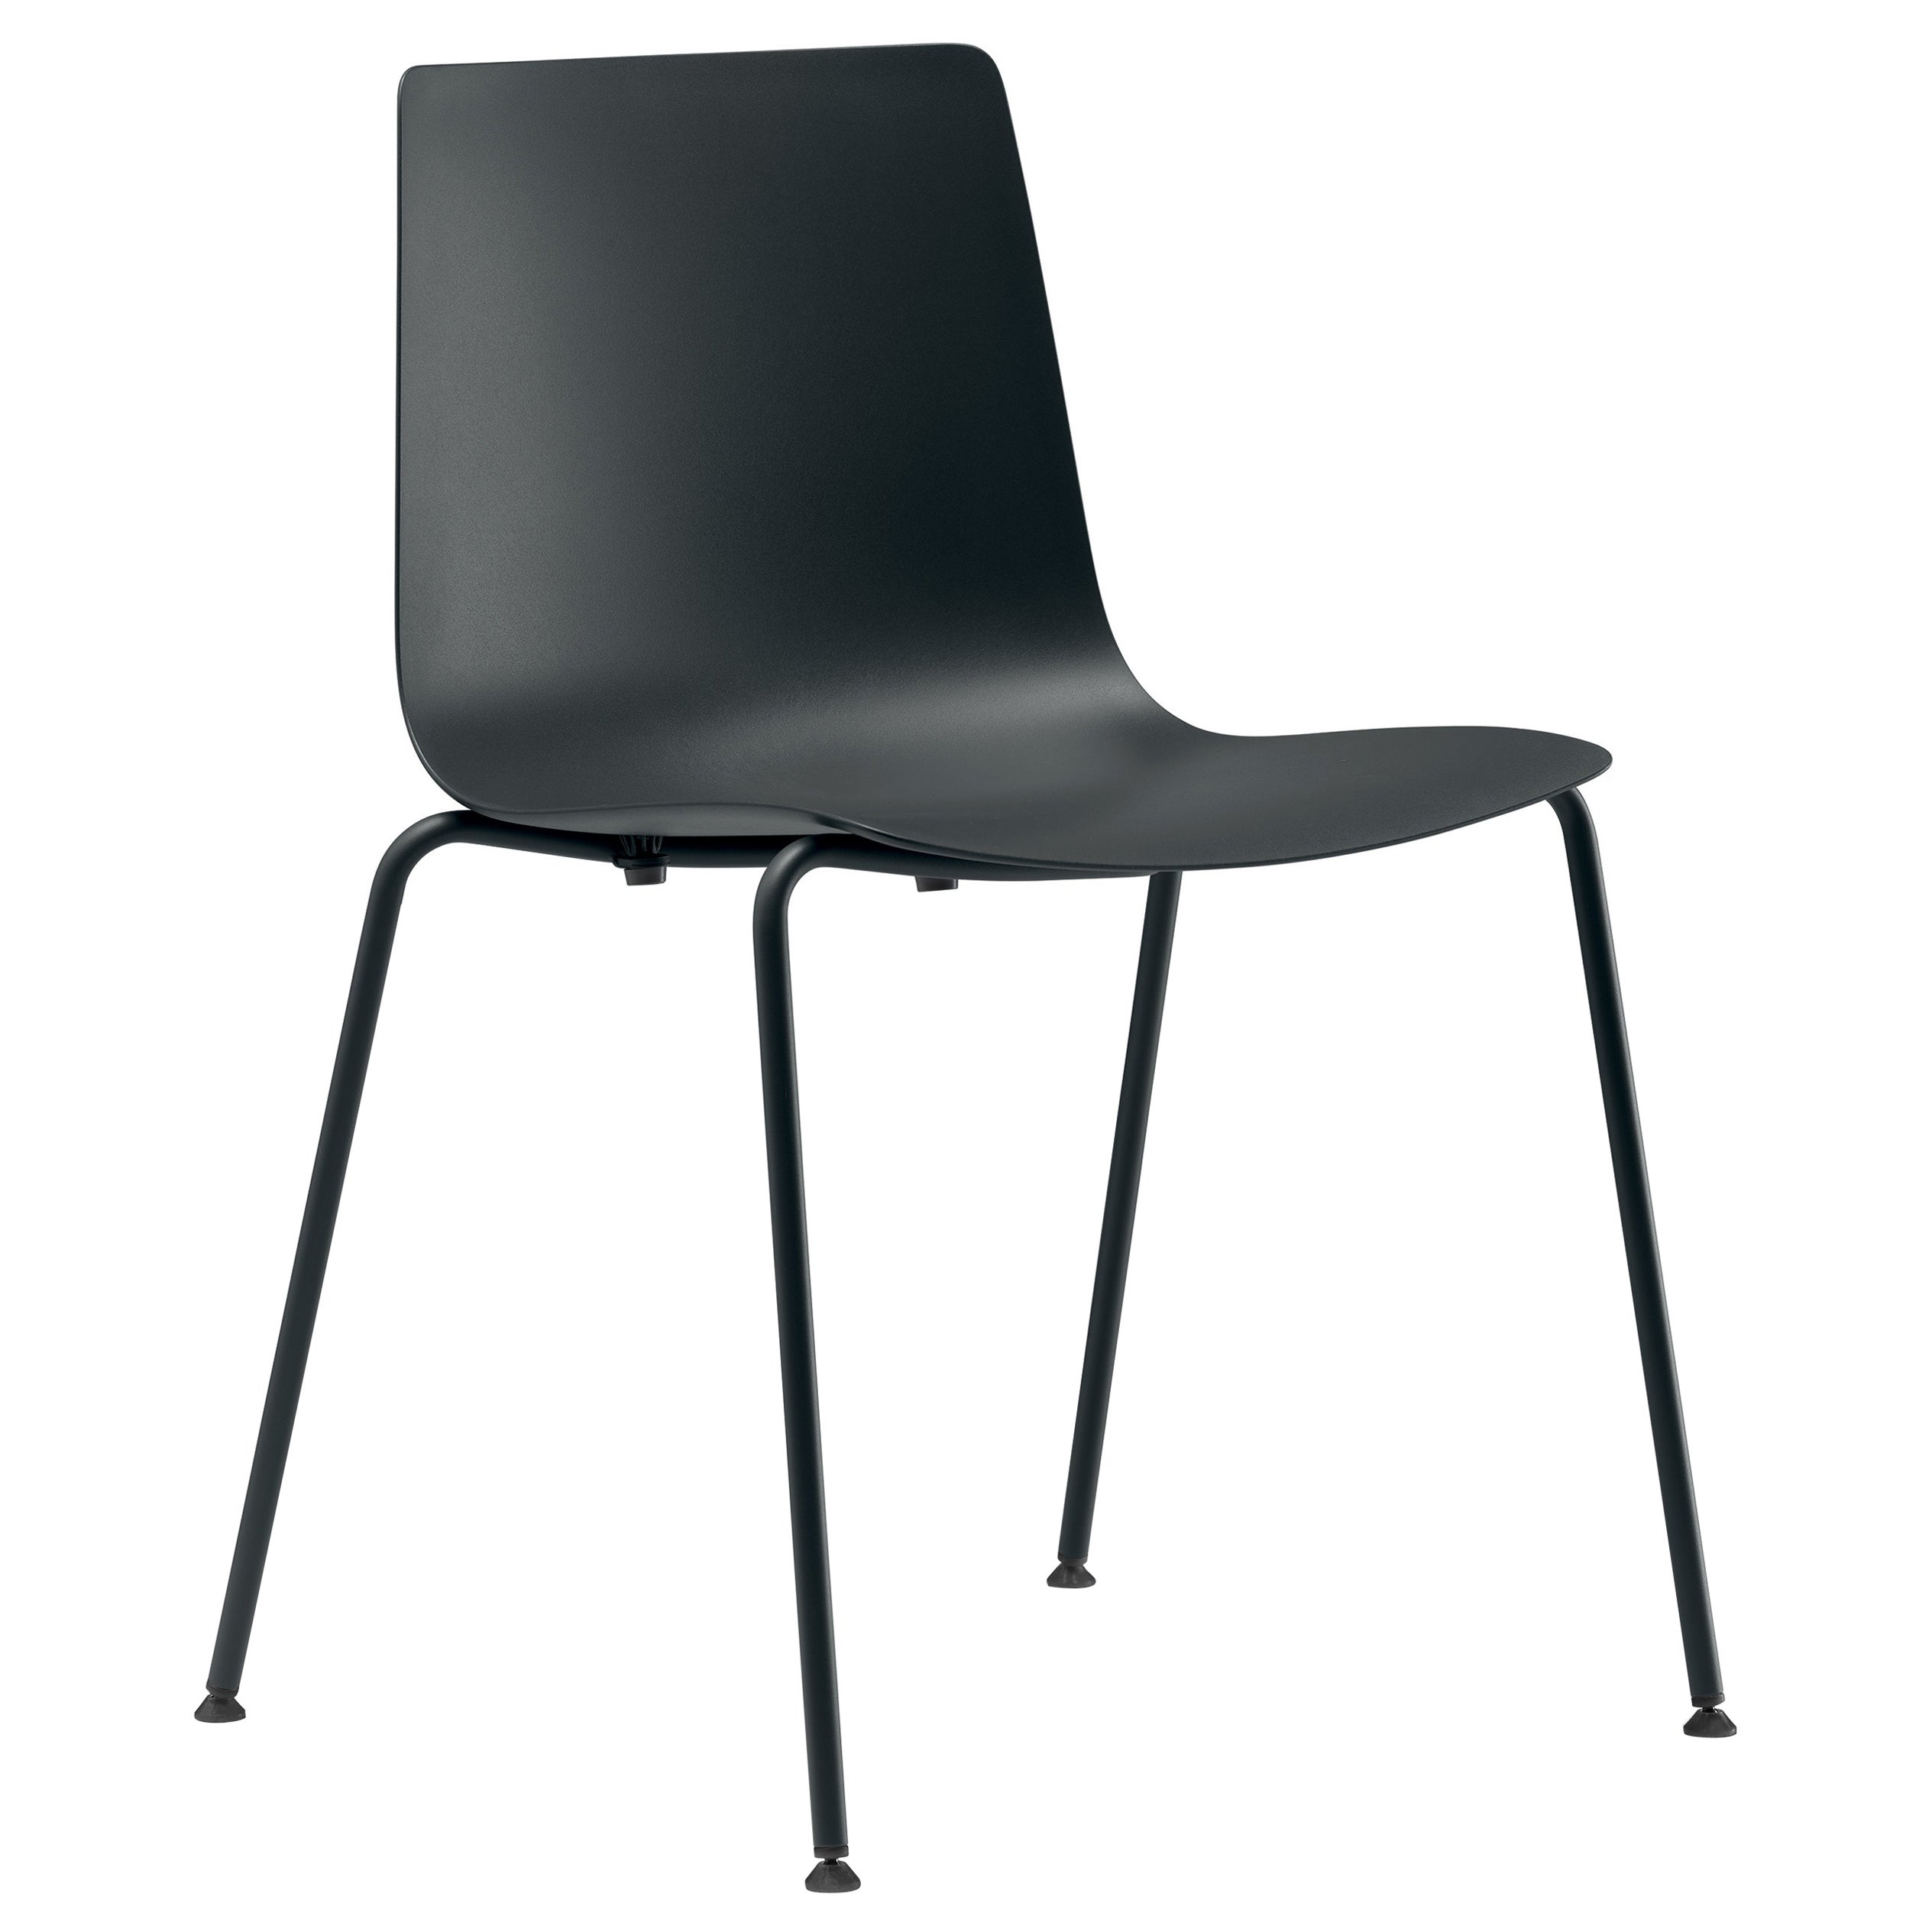 Alias 89C Slim Outdoor Chair 4 in Grey Seat with Grey Lacquered Steel Frame For Sale